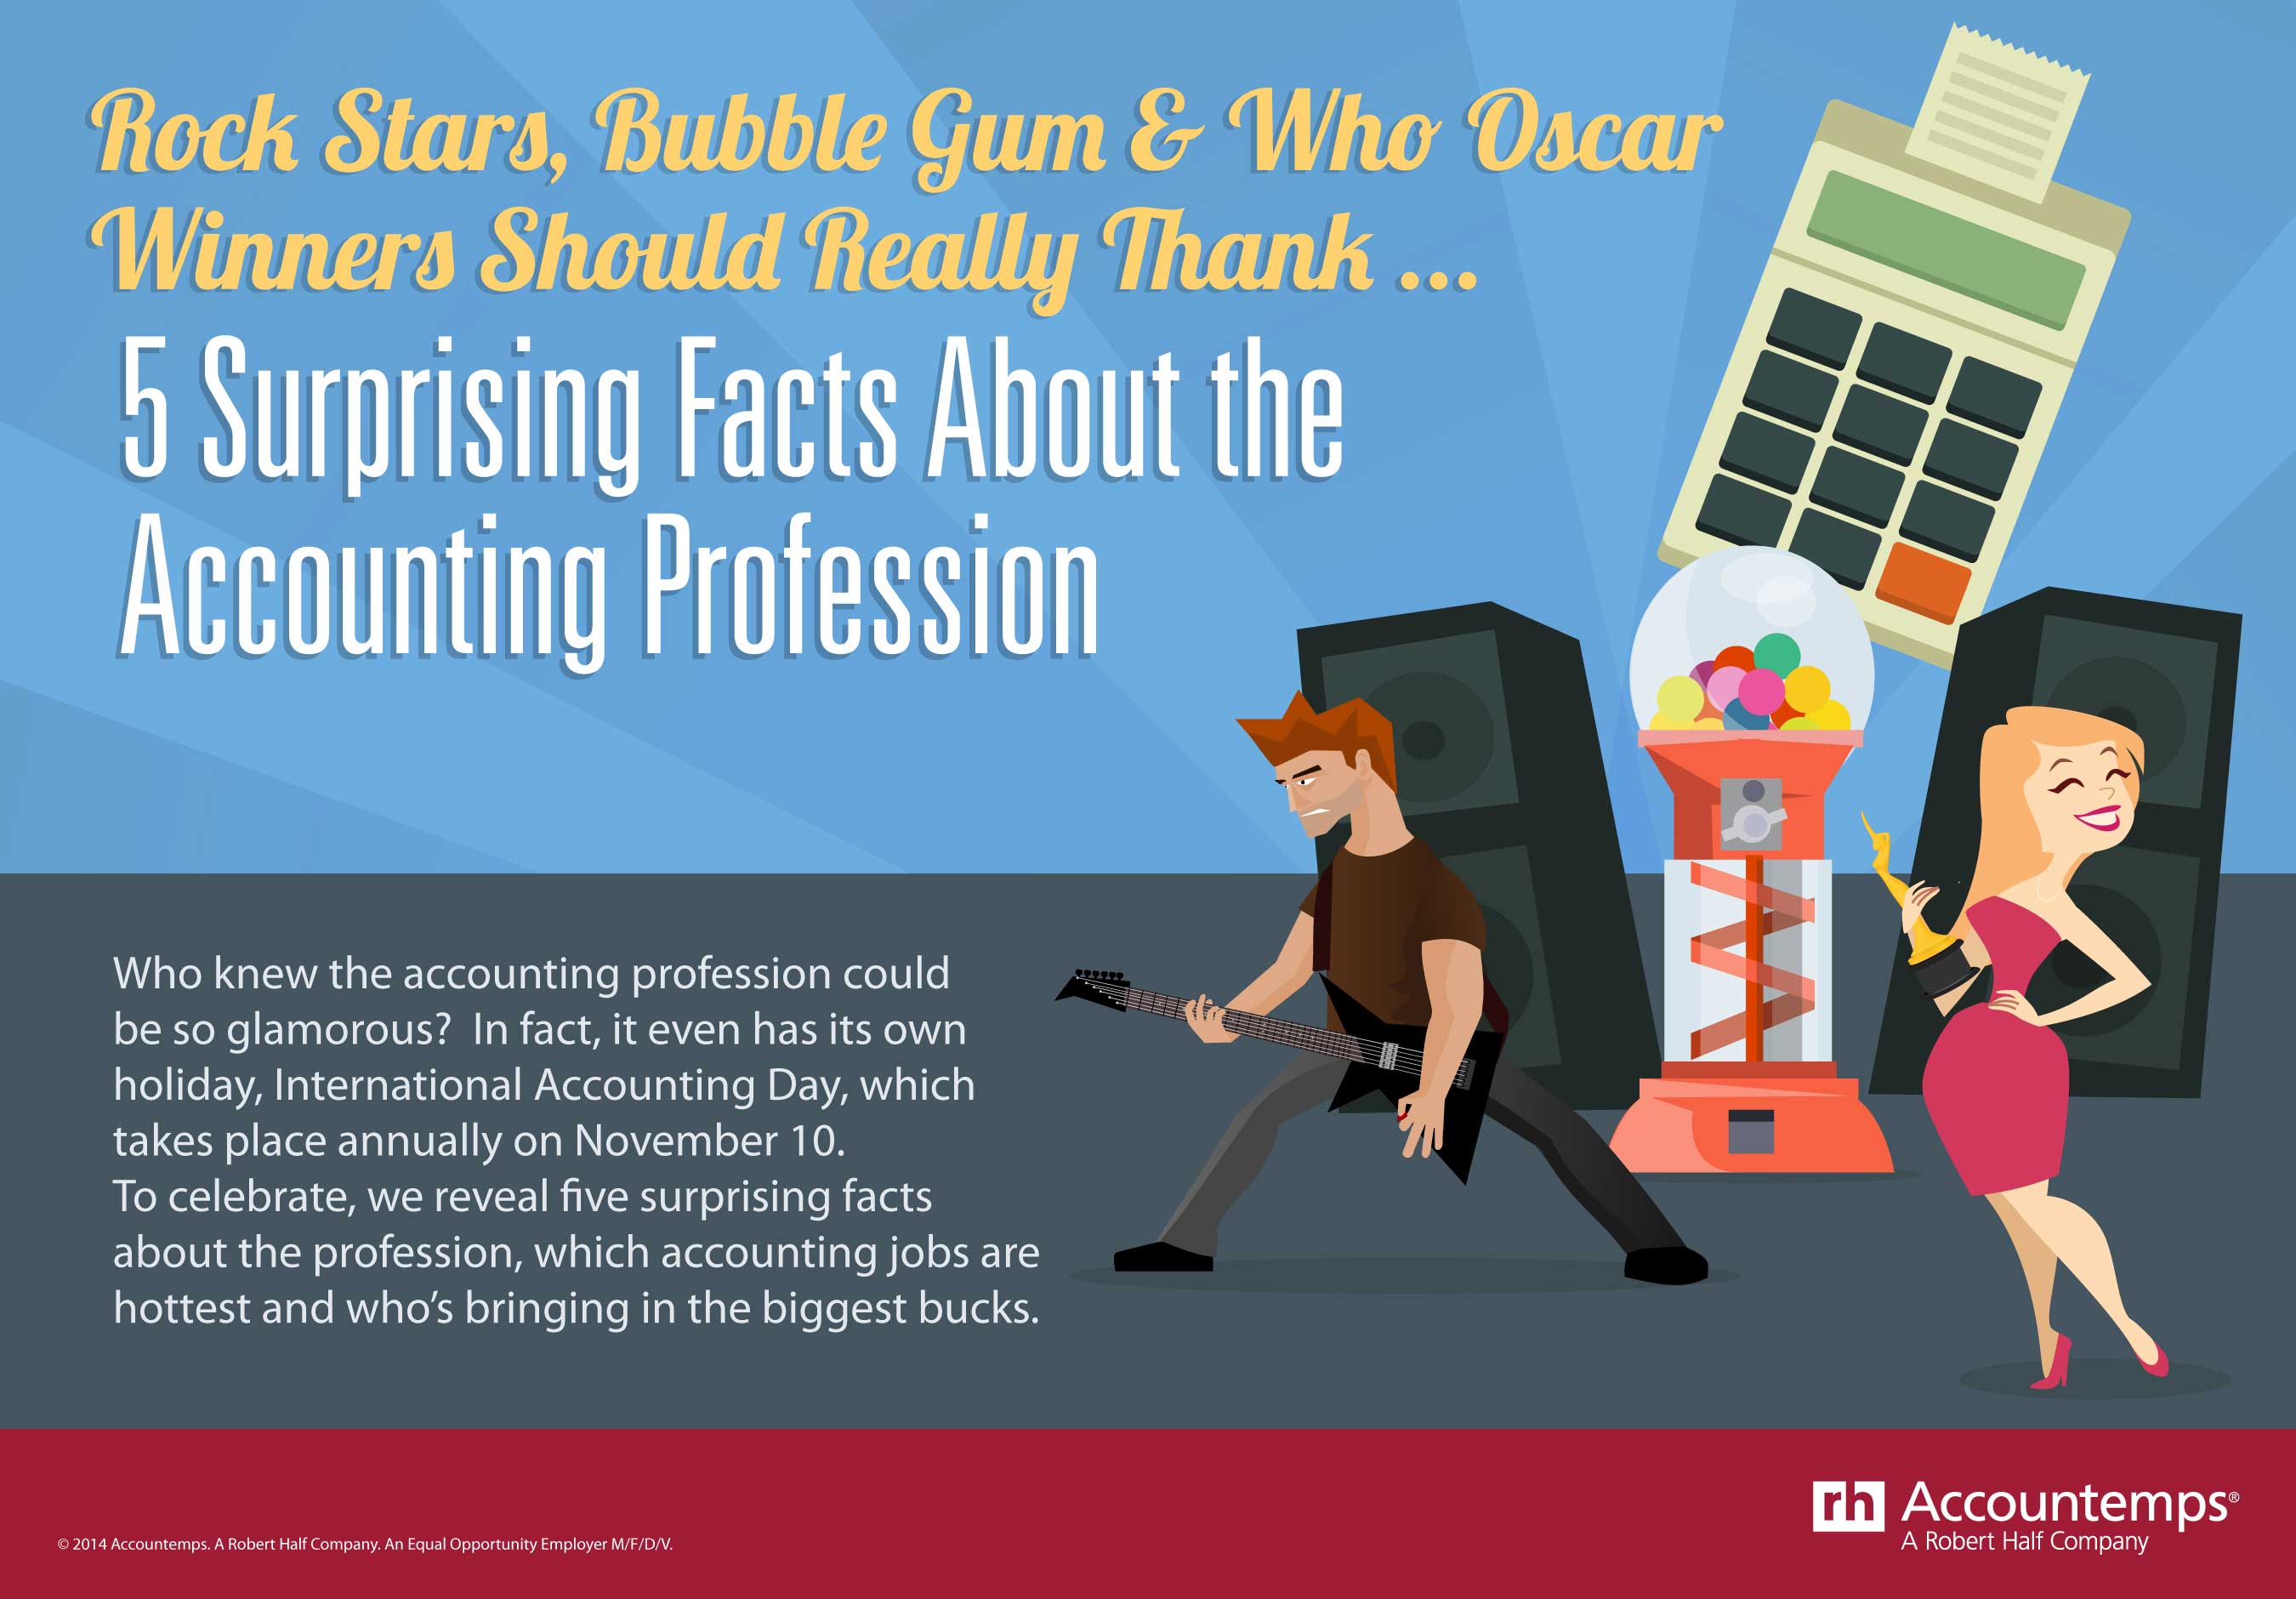 Accountemps celebrates International Accounting Day (Nov. 10) with five surprising facts about the accounting profession.